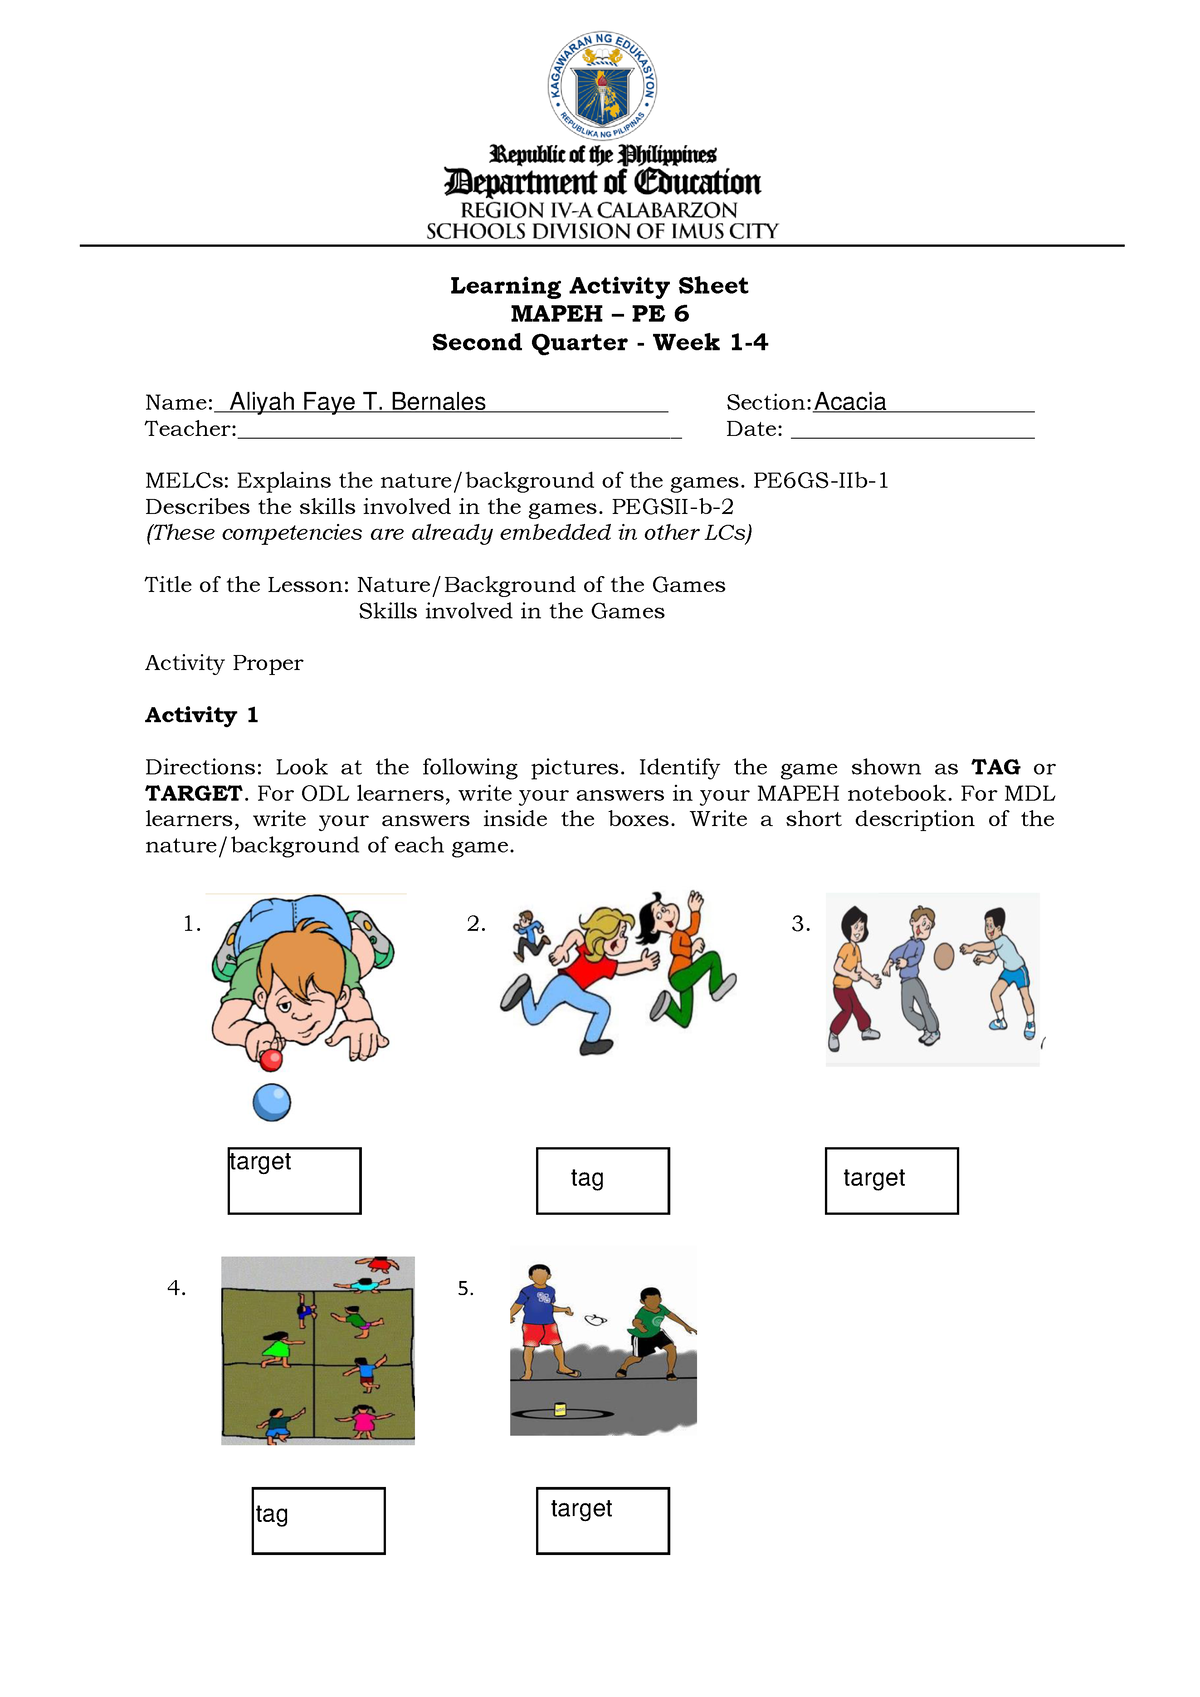 Physical Education G6 Q2 W1 4 Las Learning Activity Sheet Mapeh Pe 6 Second Quarter Week 1 4571